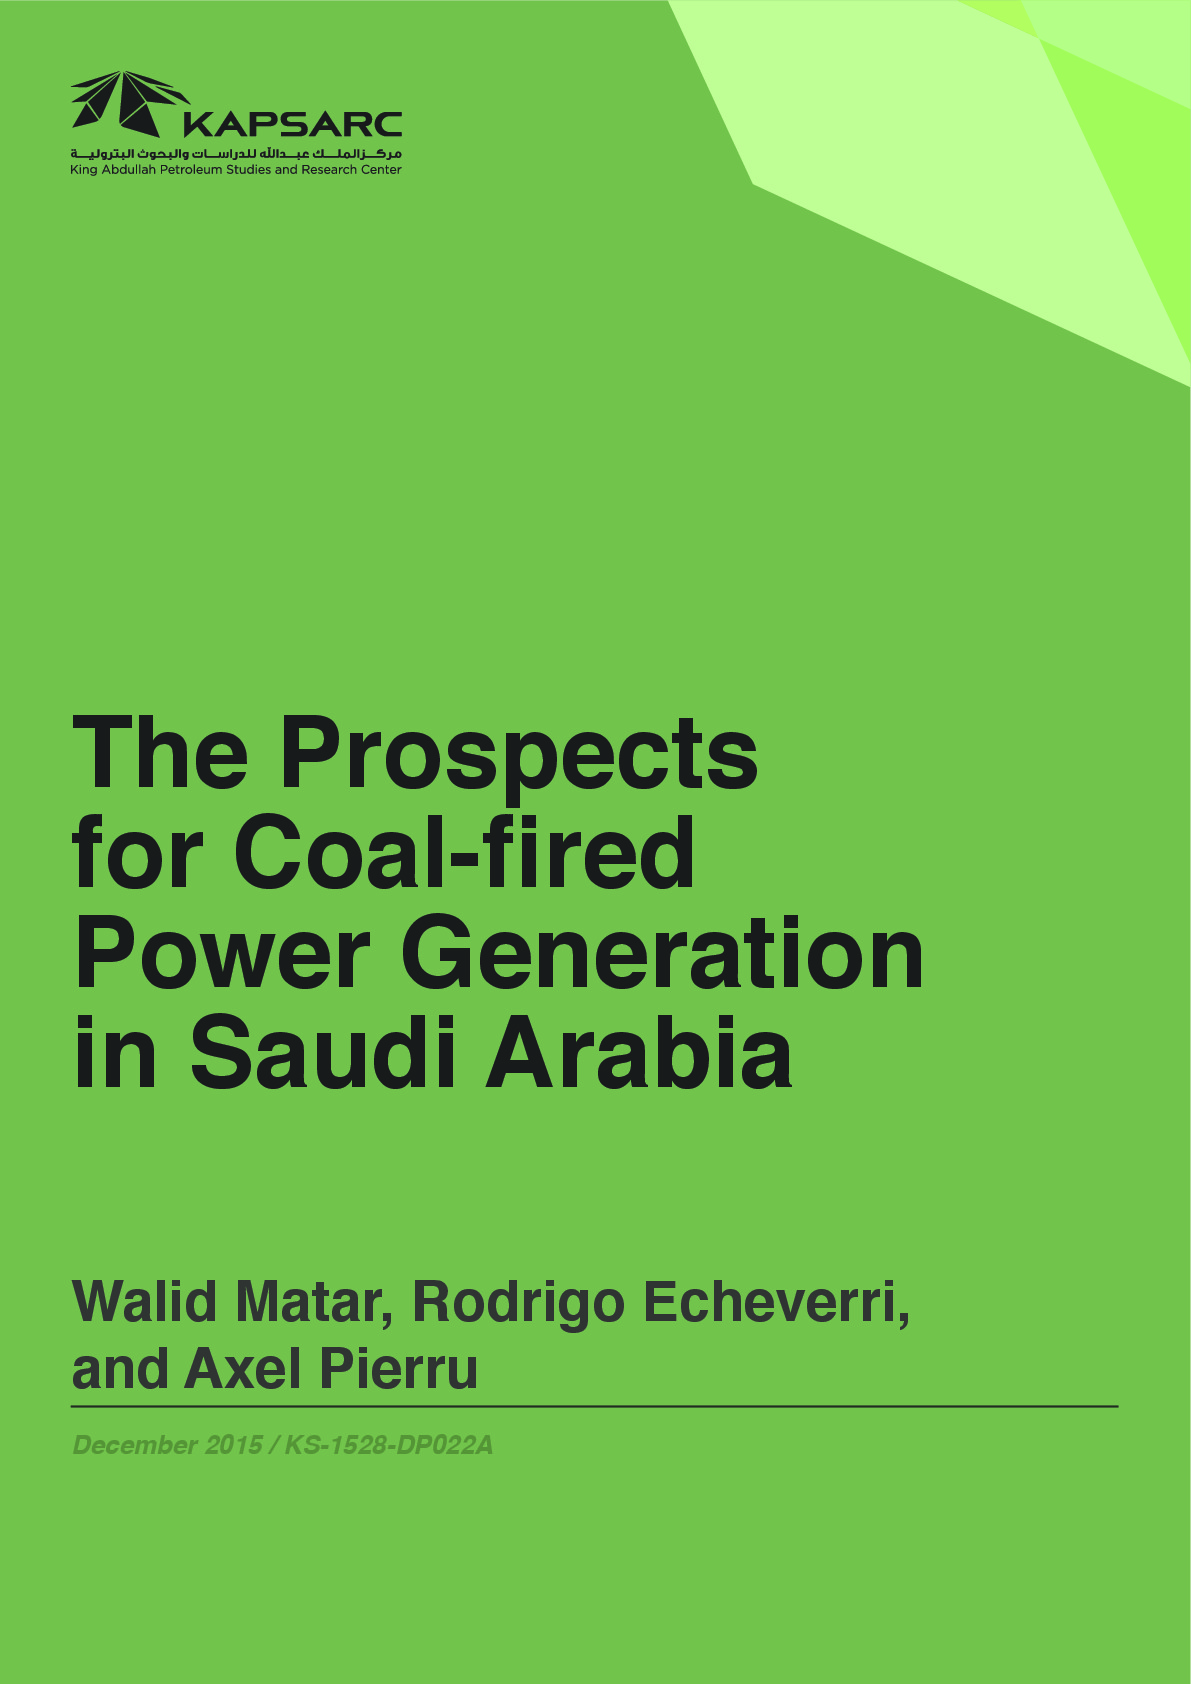 The Prospects for Coal-fired Power Generation in Saudi Arabia